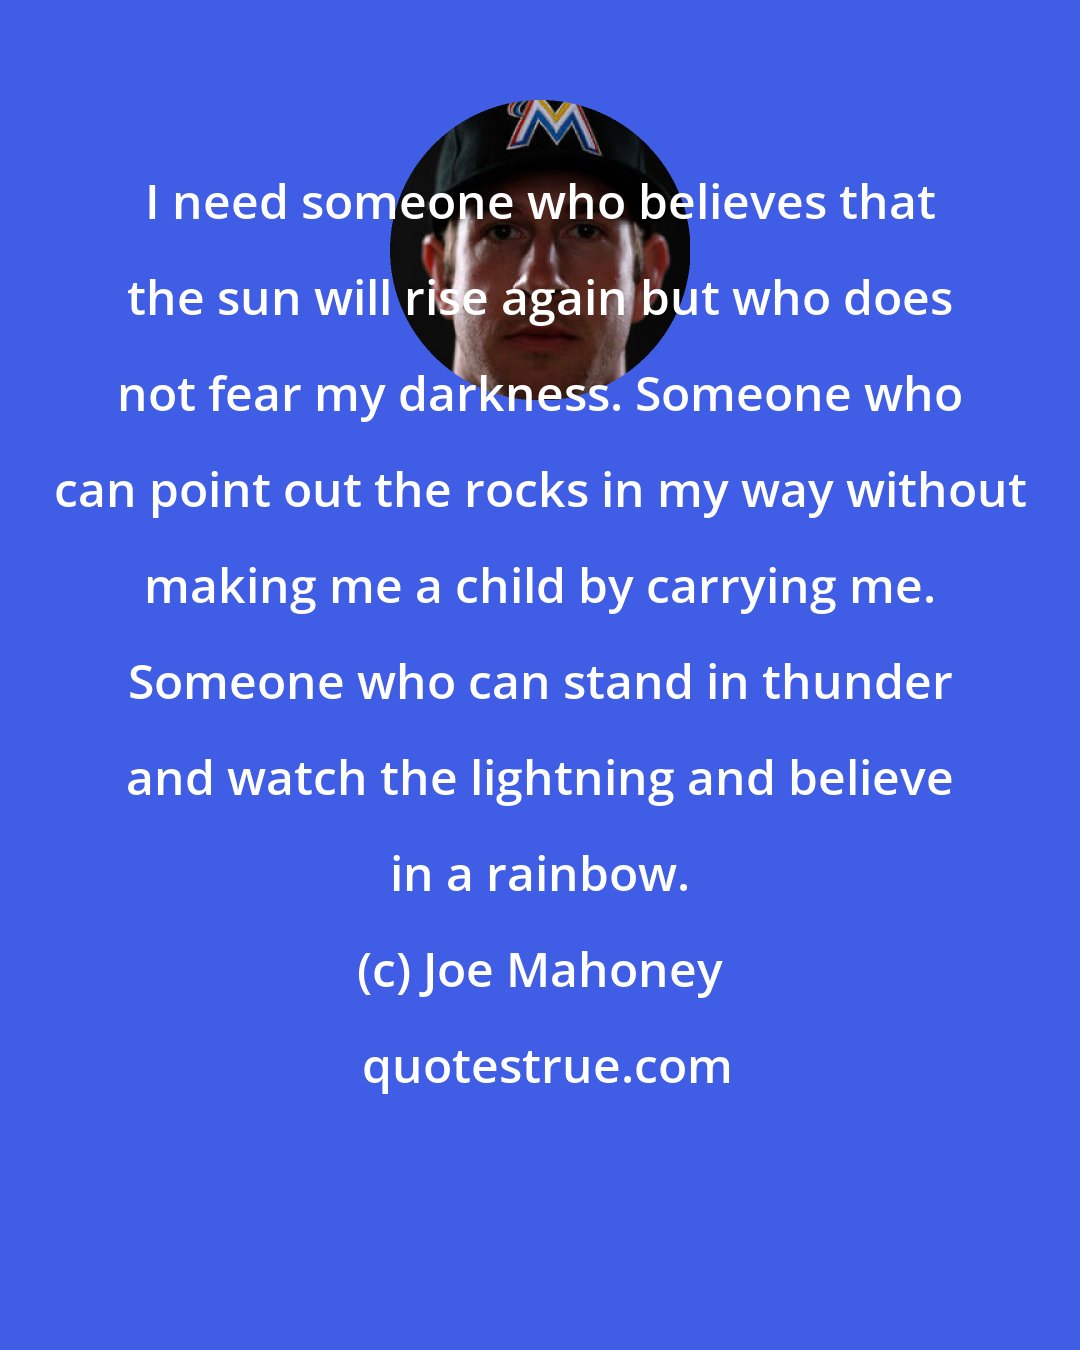 Joe Mahoney: I need someone who believes that the sun will rise again but who does not fear my darkness. Someone who can point out the rocks in my way without making me a child by carrying me. Someone who can stand in thunder and watch the lightning and believe in a rainbow.